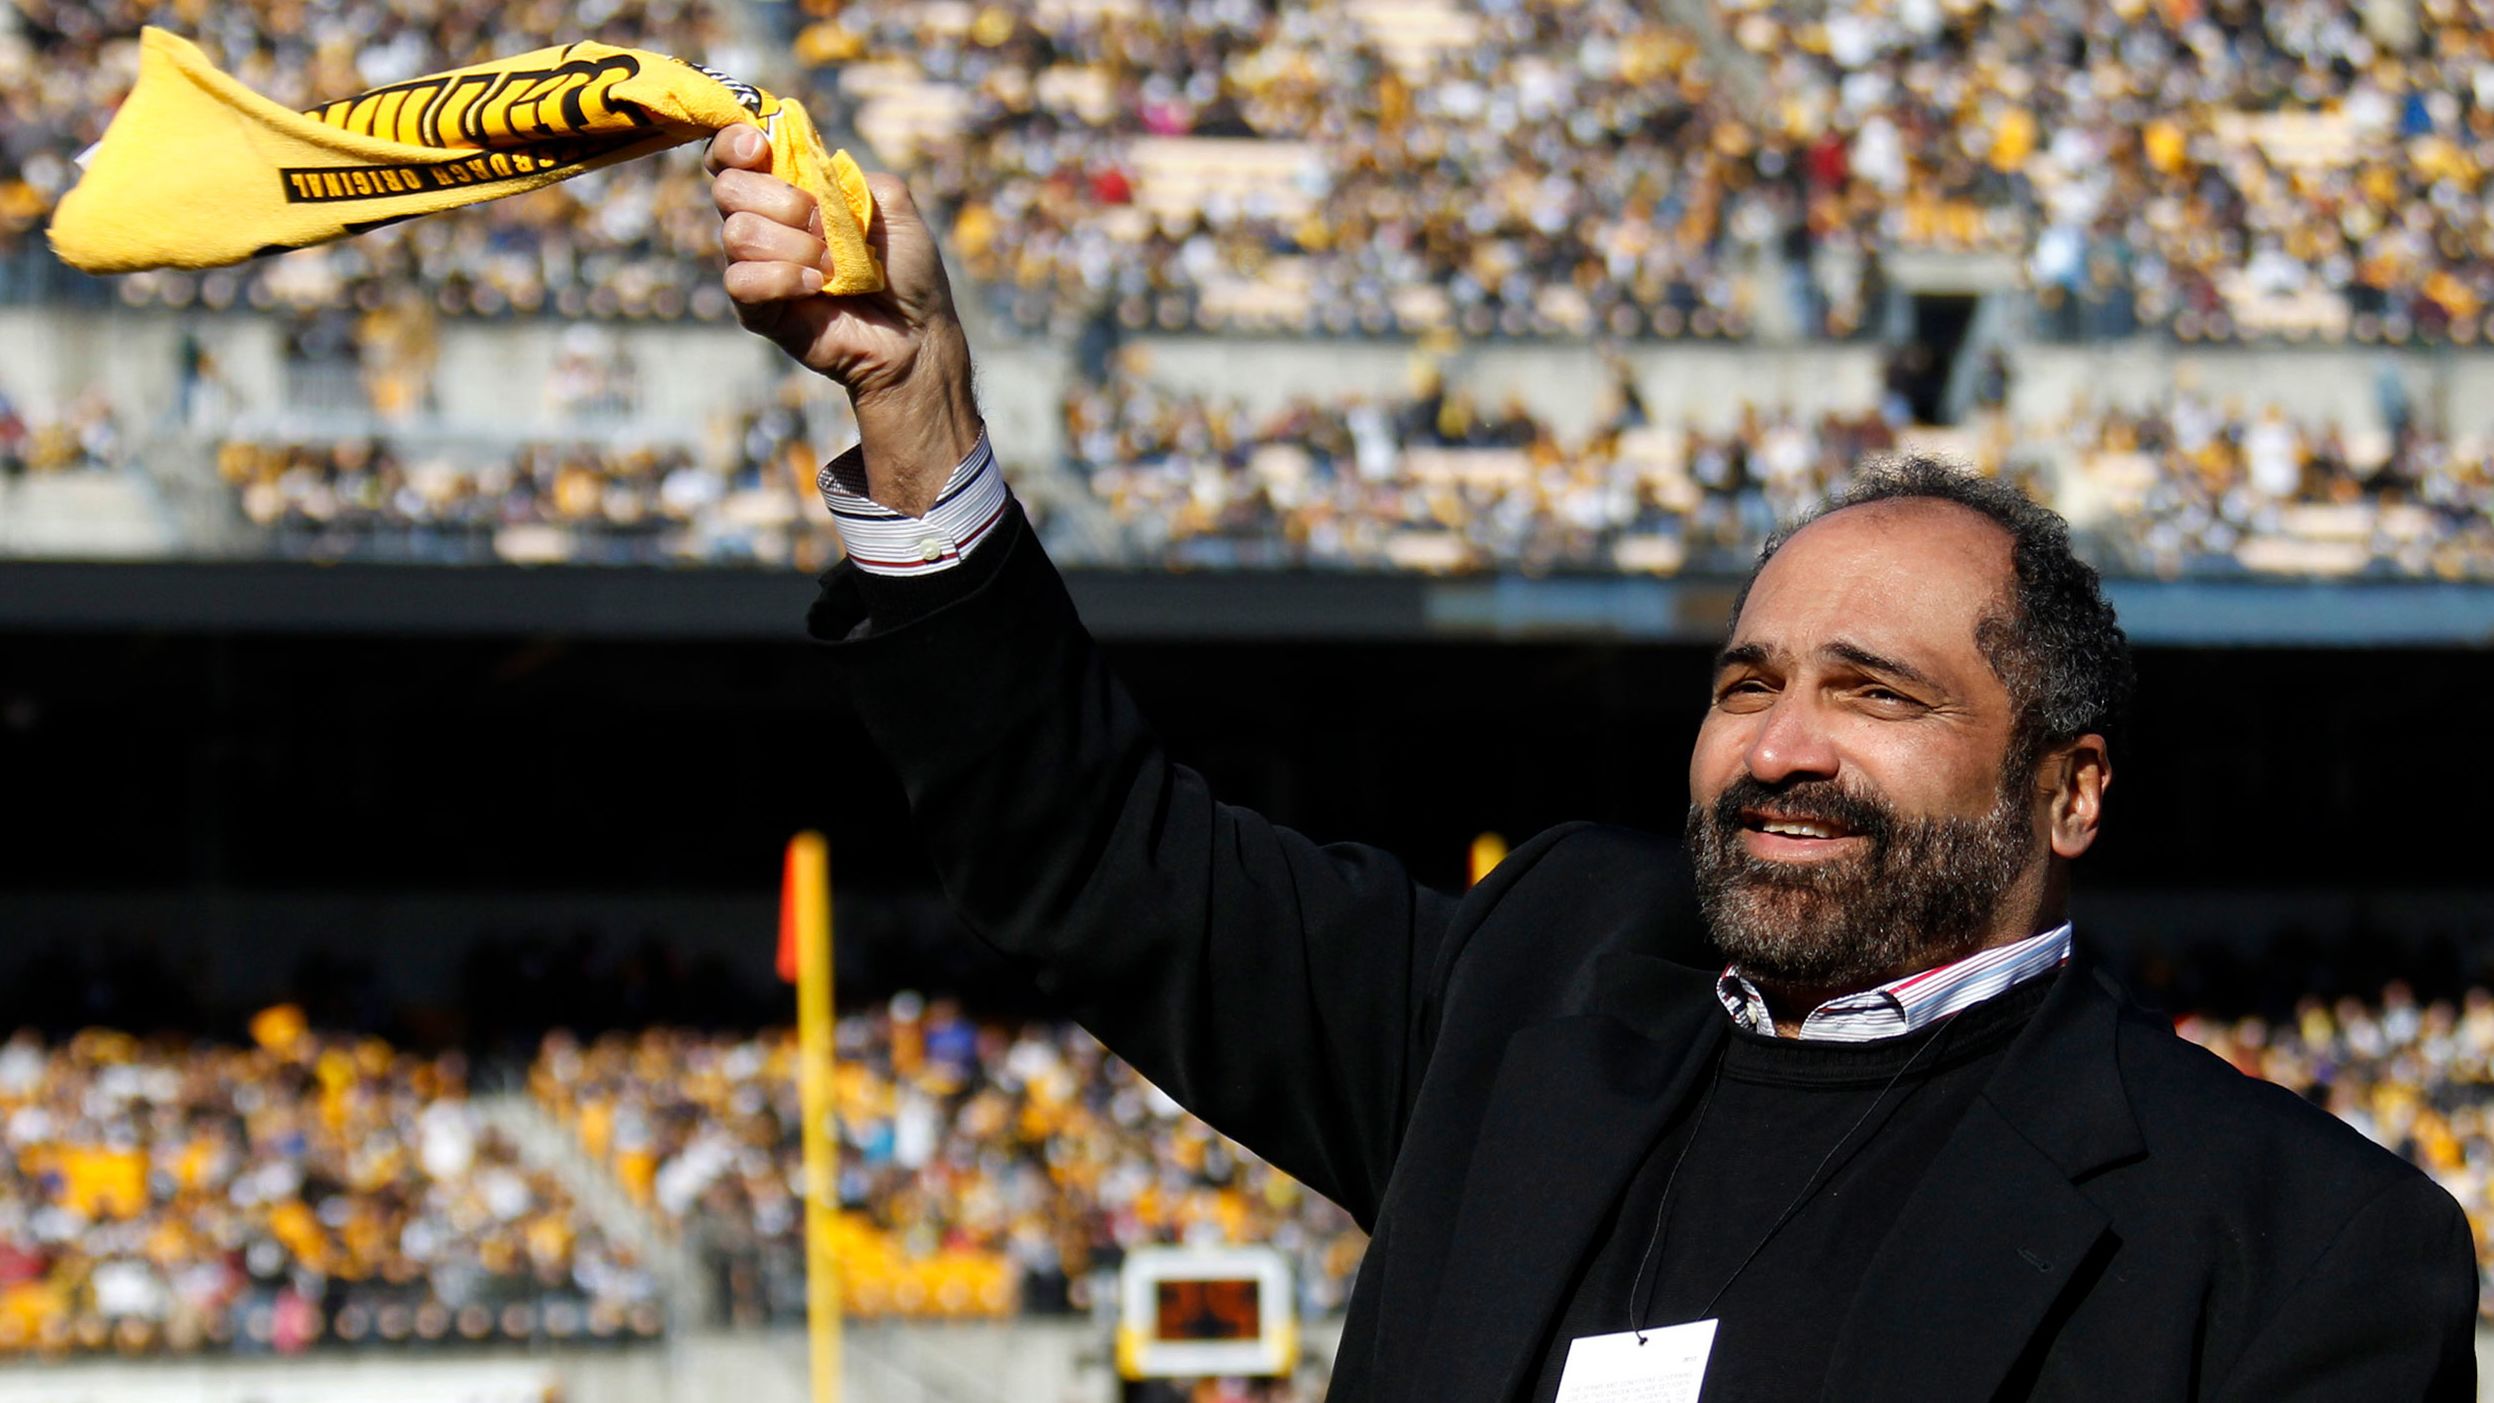 Pittsburgh Steelers great <a href="https://www.cnn.com/2022/12/21/sport/nfl-franco-harris-obit-spt-intl/index.html" target="_blank">Franco Harris,</a> known for one of the most iconic plays in NFL history -- the <a href="https://www.cnn.com/2019/09/21/us/nfl-greatest-play-immaculate-reception/index.html" target="_blank">"Immaculate Reception"</a> -- died at the age of 72, the Pro Football Hall of Fame announced on December 21.